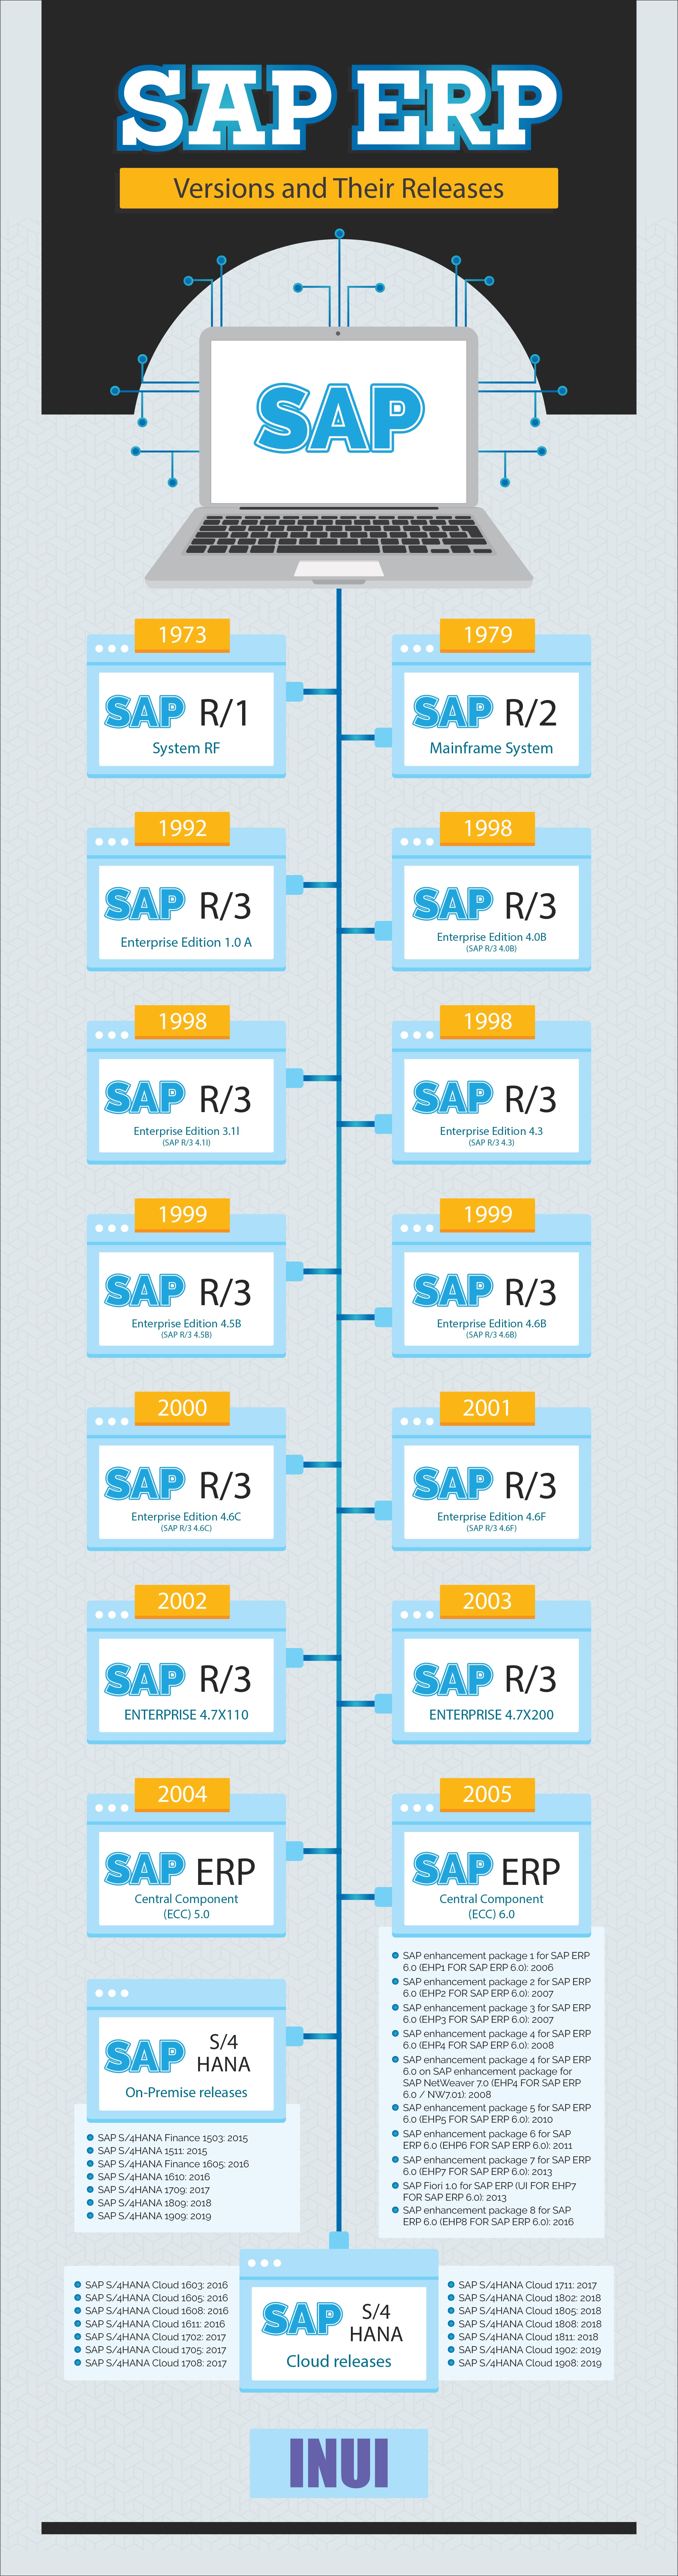 sap_erp_versions_infographic-100